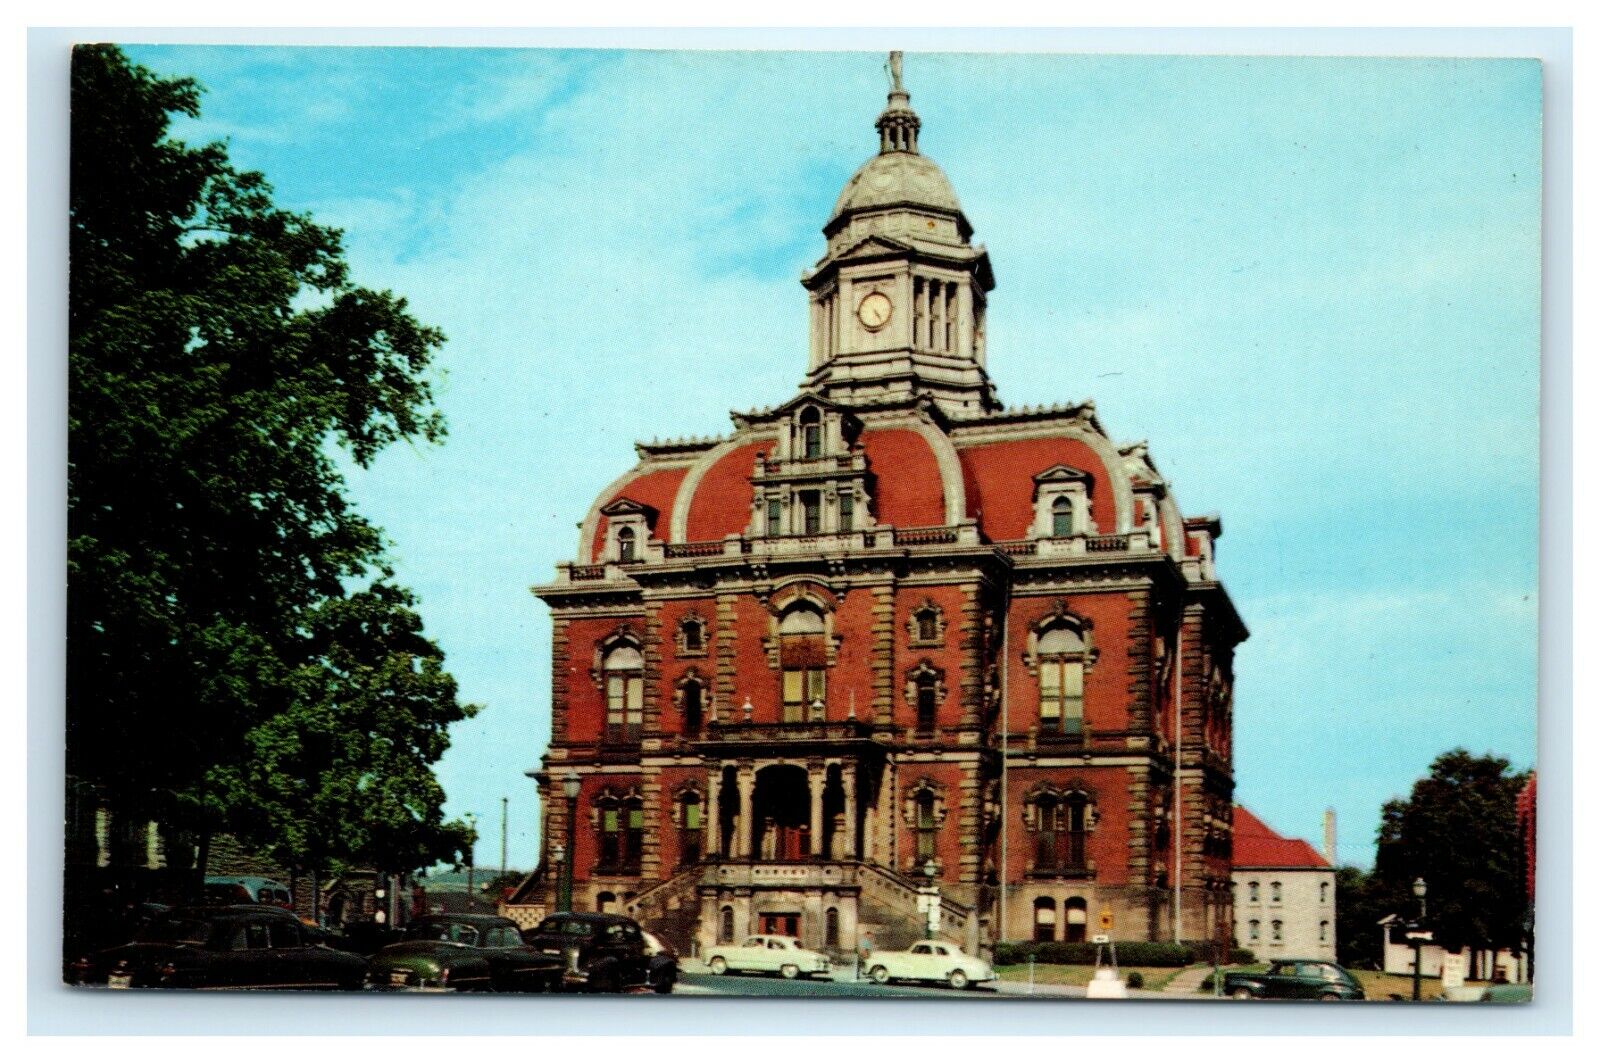 POSTCARD Richland County Courthouse Built in 1870 Mansfield Ohio Public Square